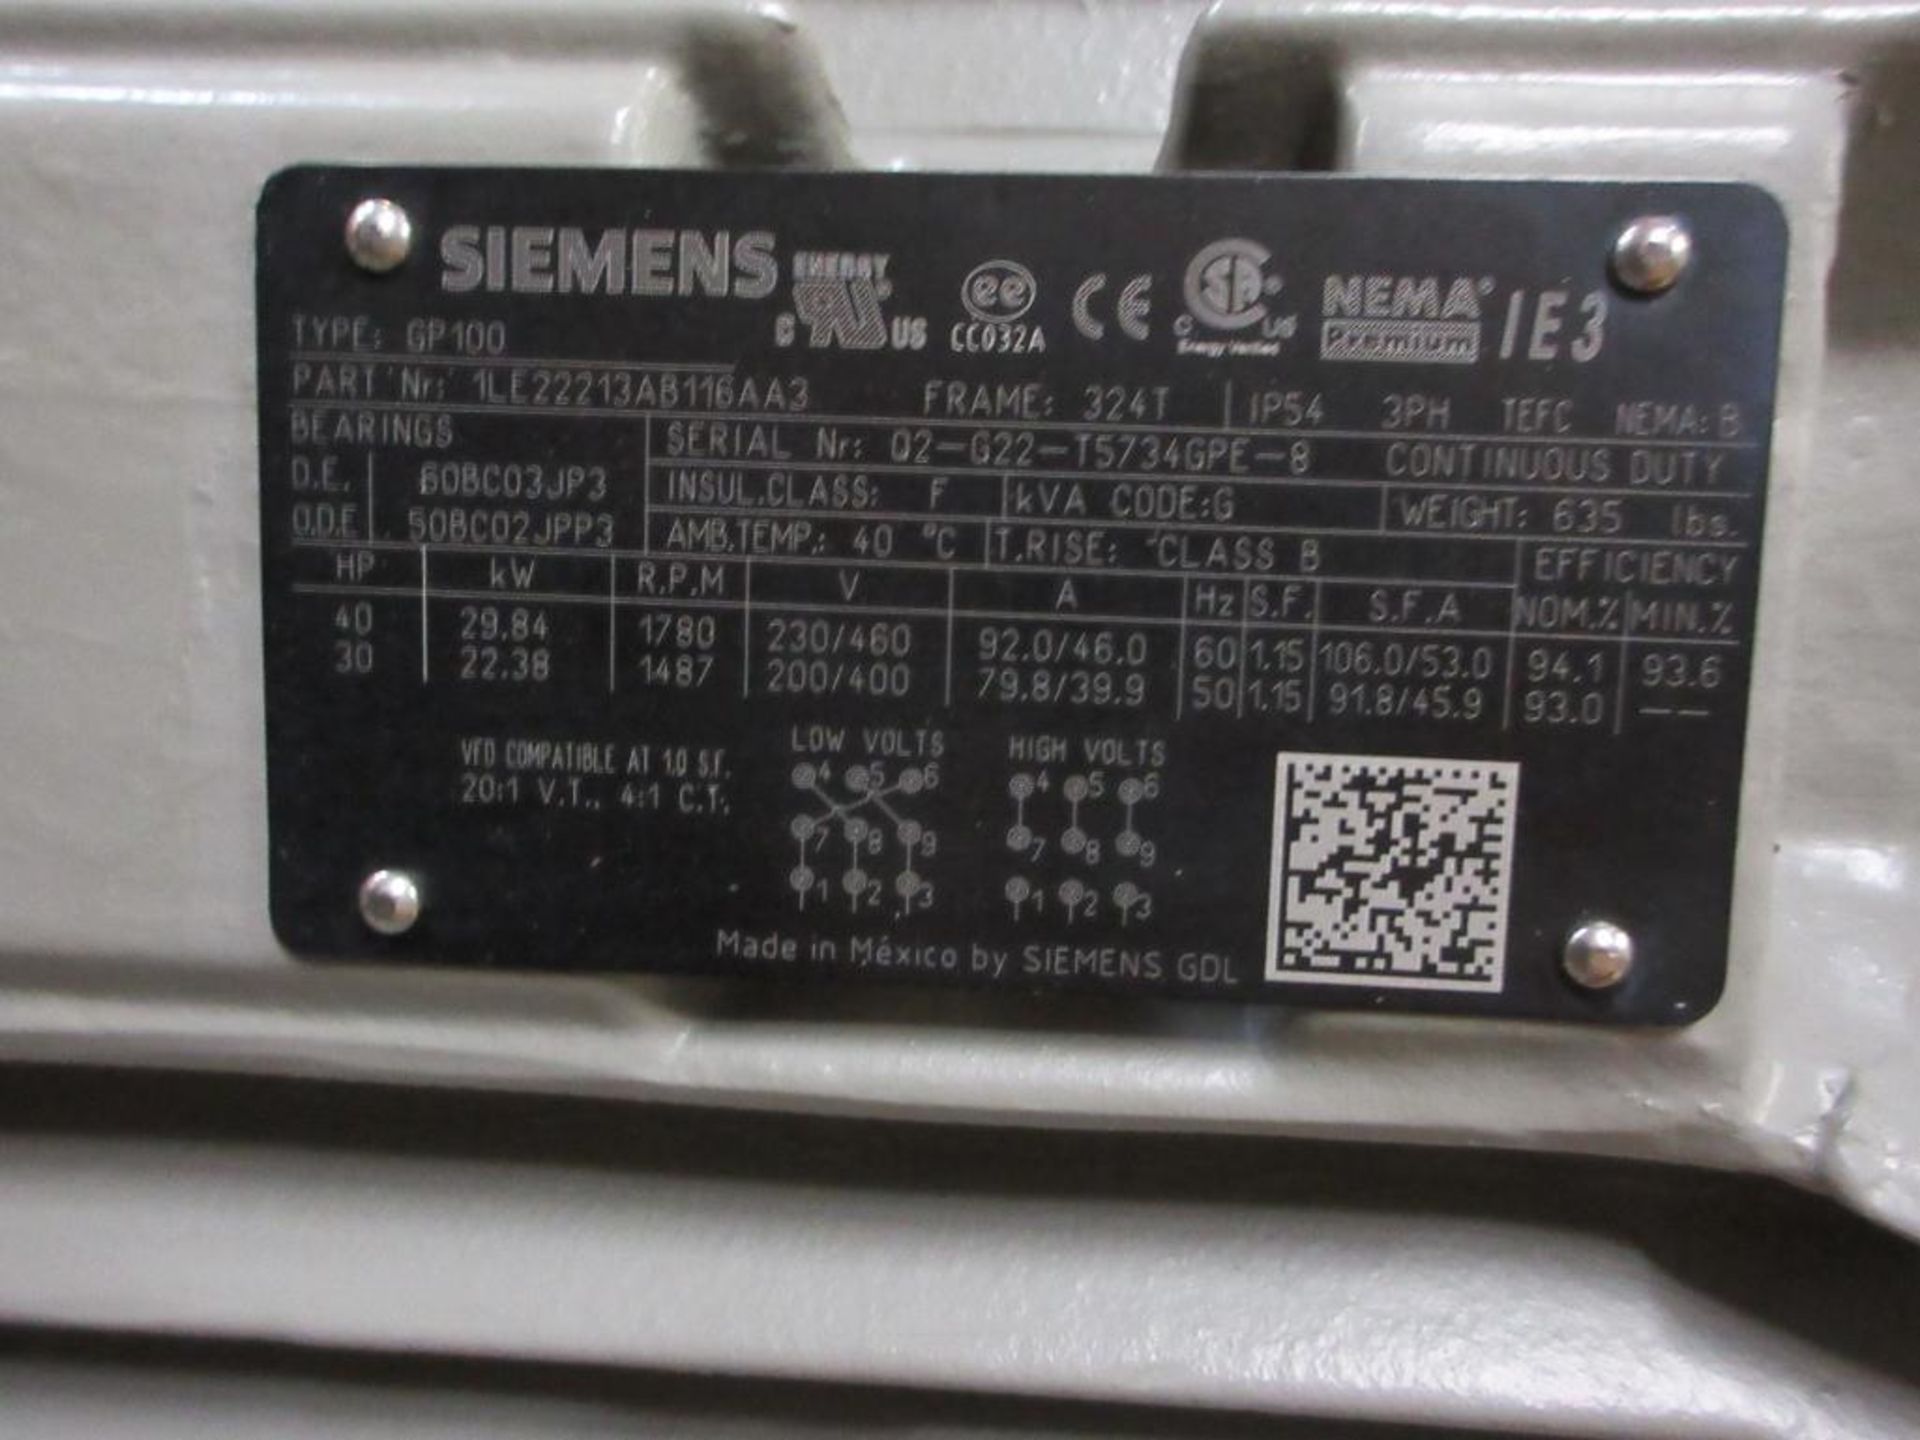 SIEMENS MOTOR 40HP 3 PHASE 1800RPM FRAME 324T P/N 1LE22213AB116AA3 TYPE GP100 (THIS LOT IS FOB CAMAR - Image 9 of 9